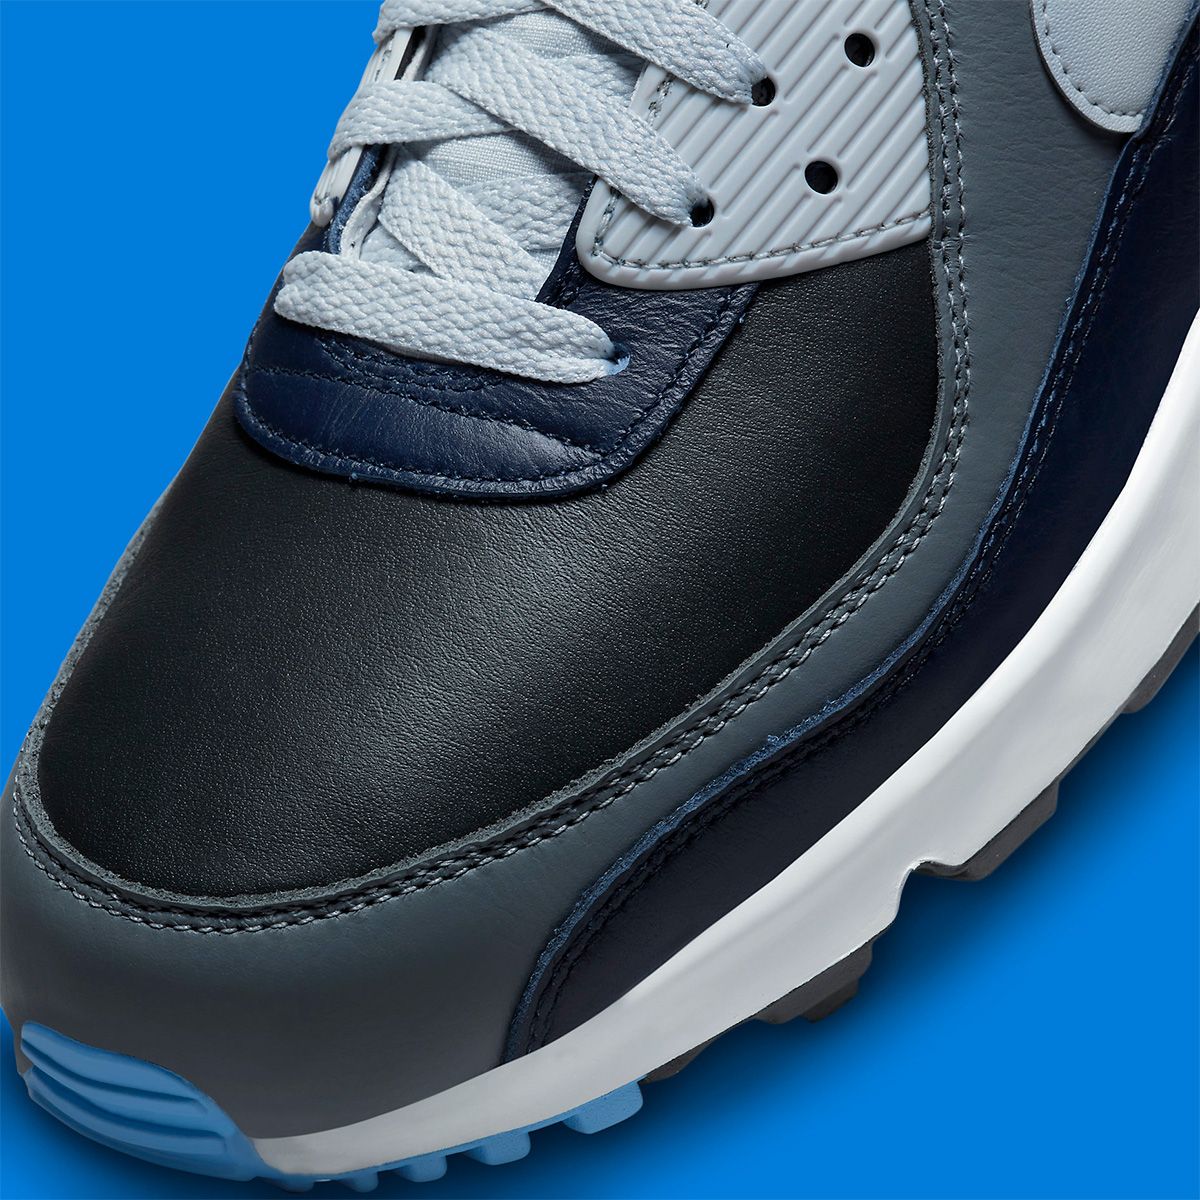 The Nike Air Max 90 GORE-TEX Appears in Anthracite, Obsidian and Pure ...